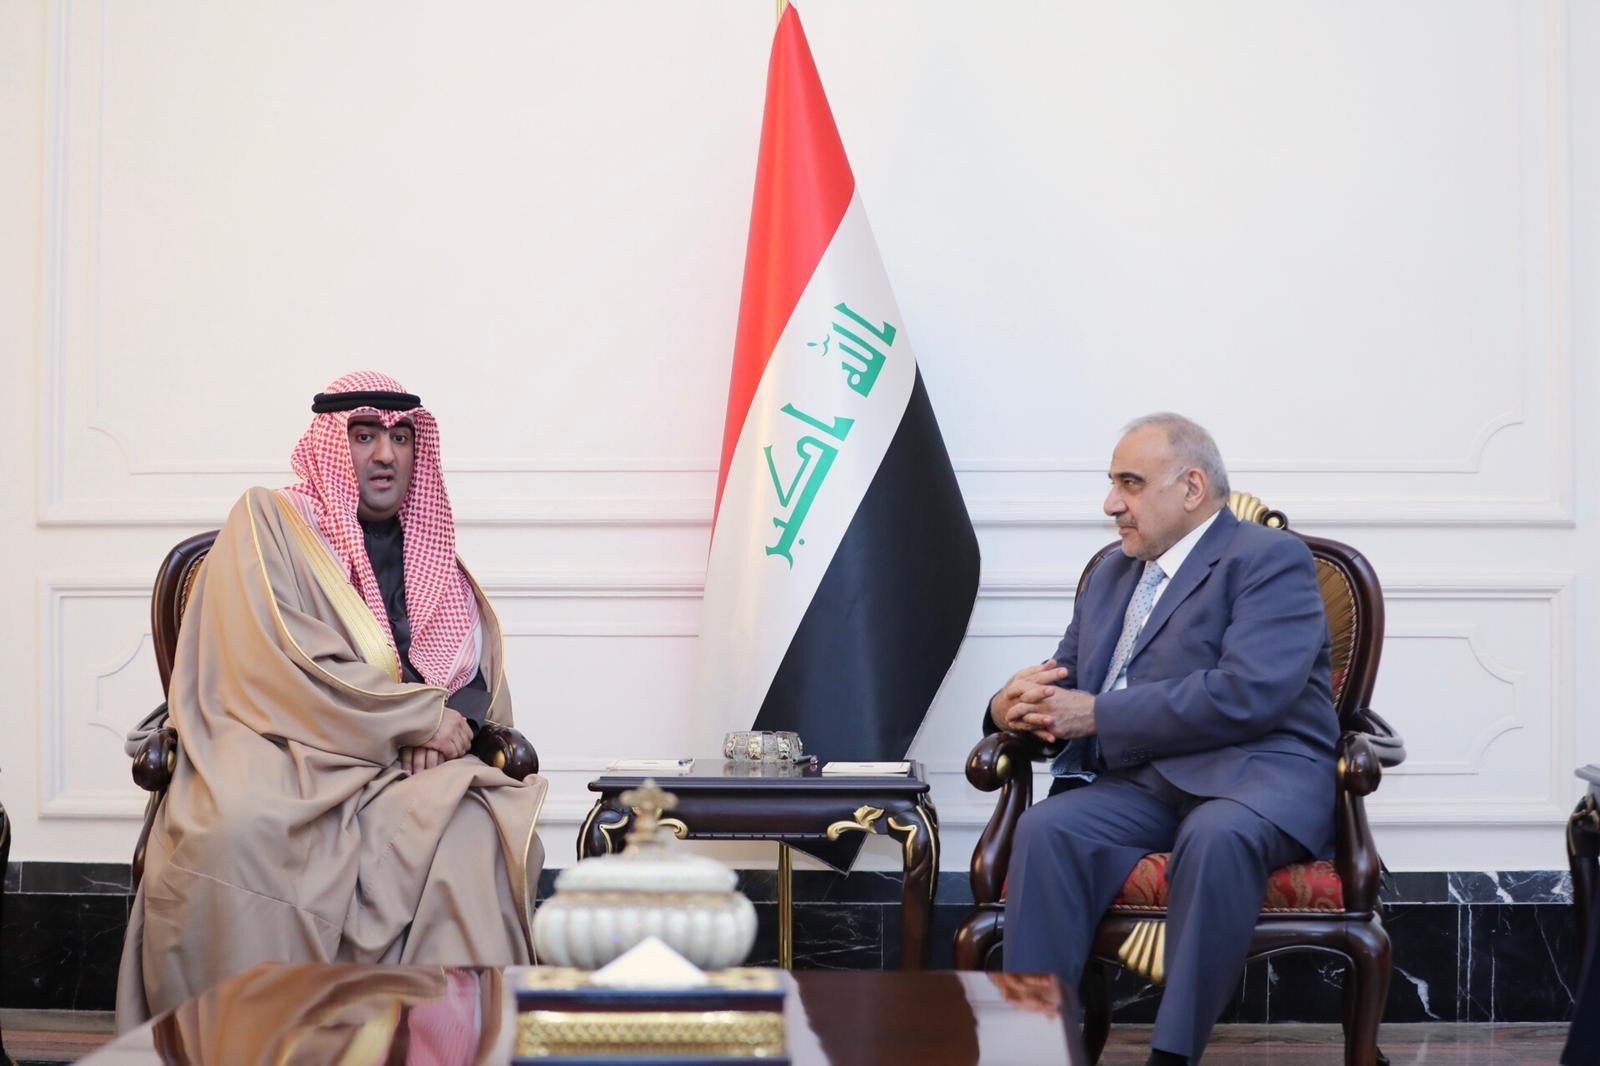 Iraqi Prime Minister Adel Abdul-Mahdi with Kuwaiti Minister of Commerce and Industry Khaled Al-Roudhan